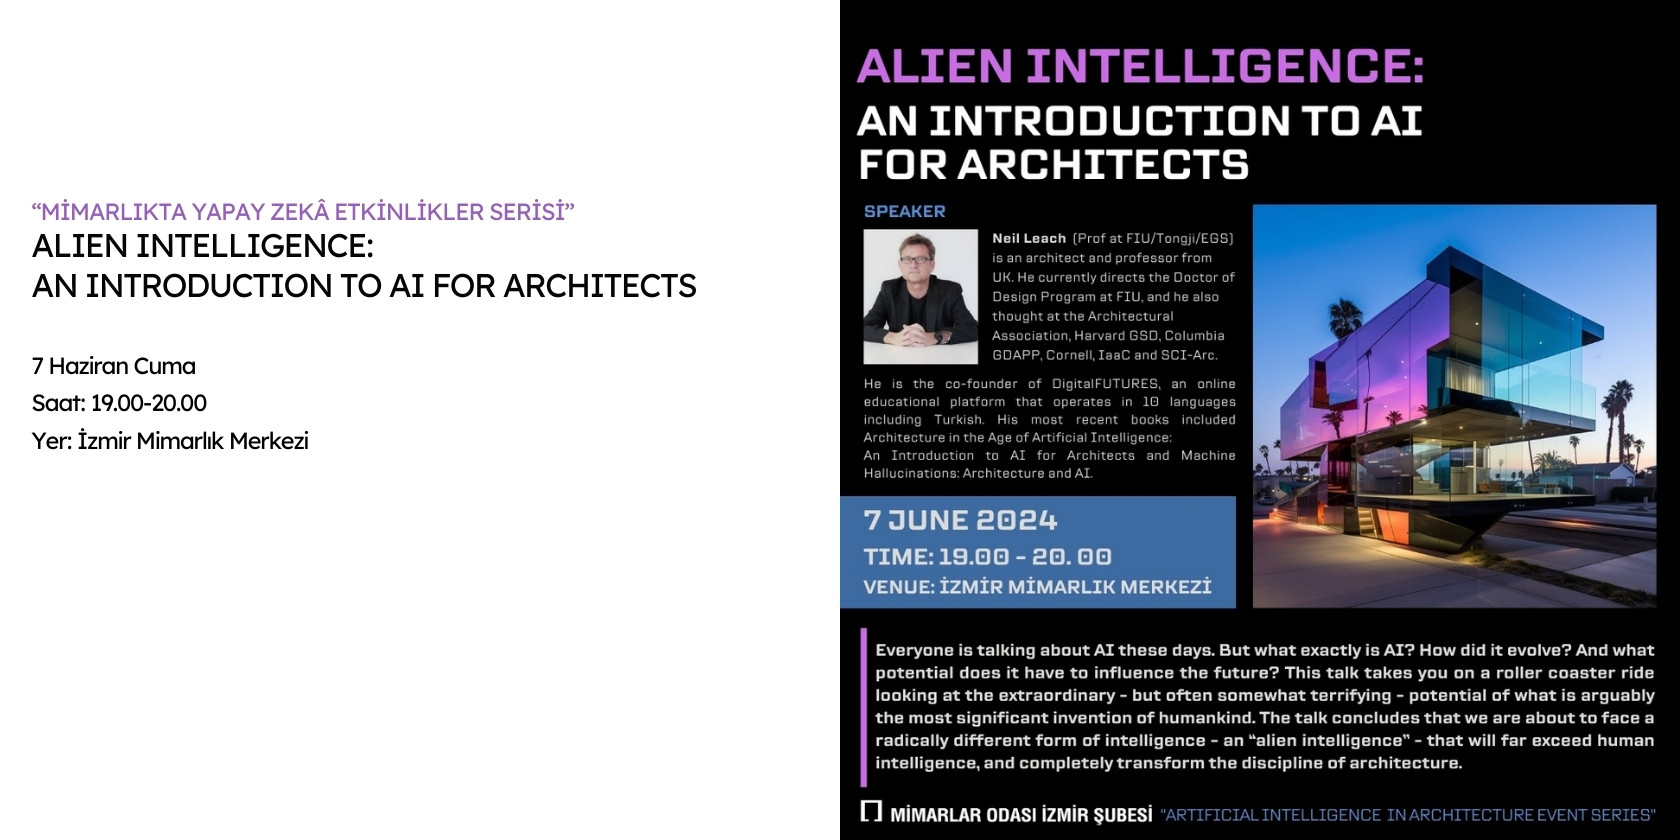 Alien Intelligence: An Introduction to AI for Architects